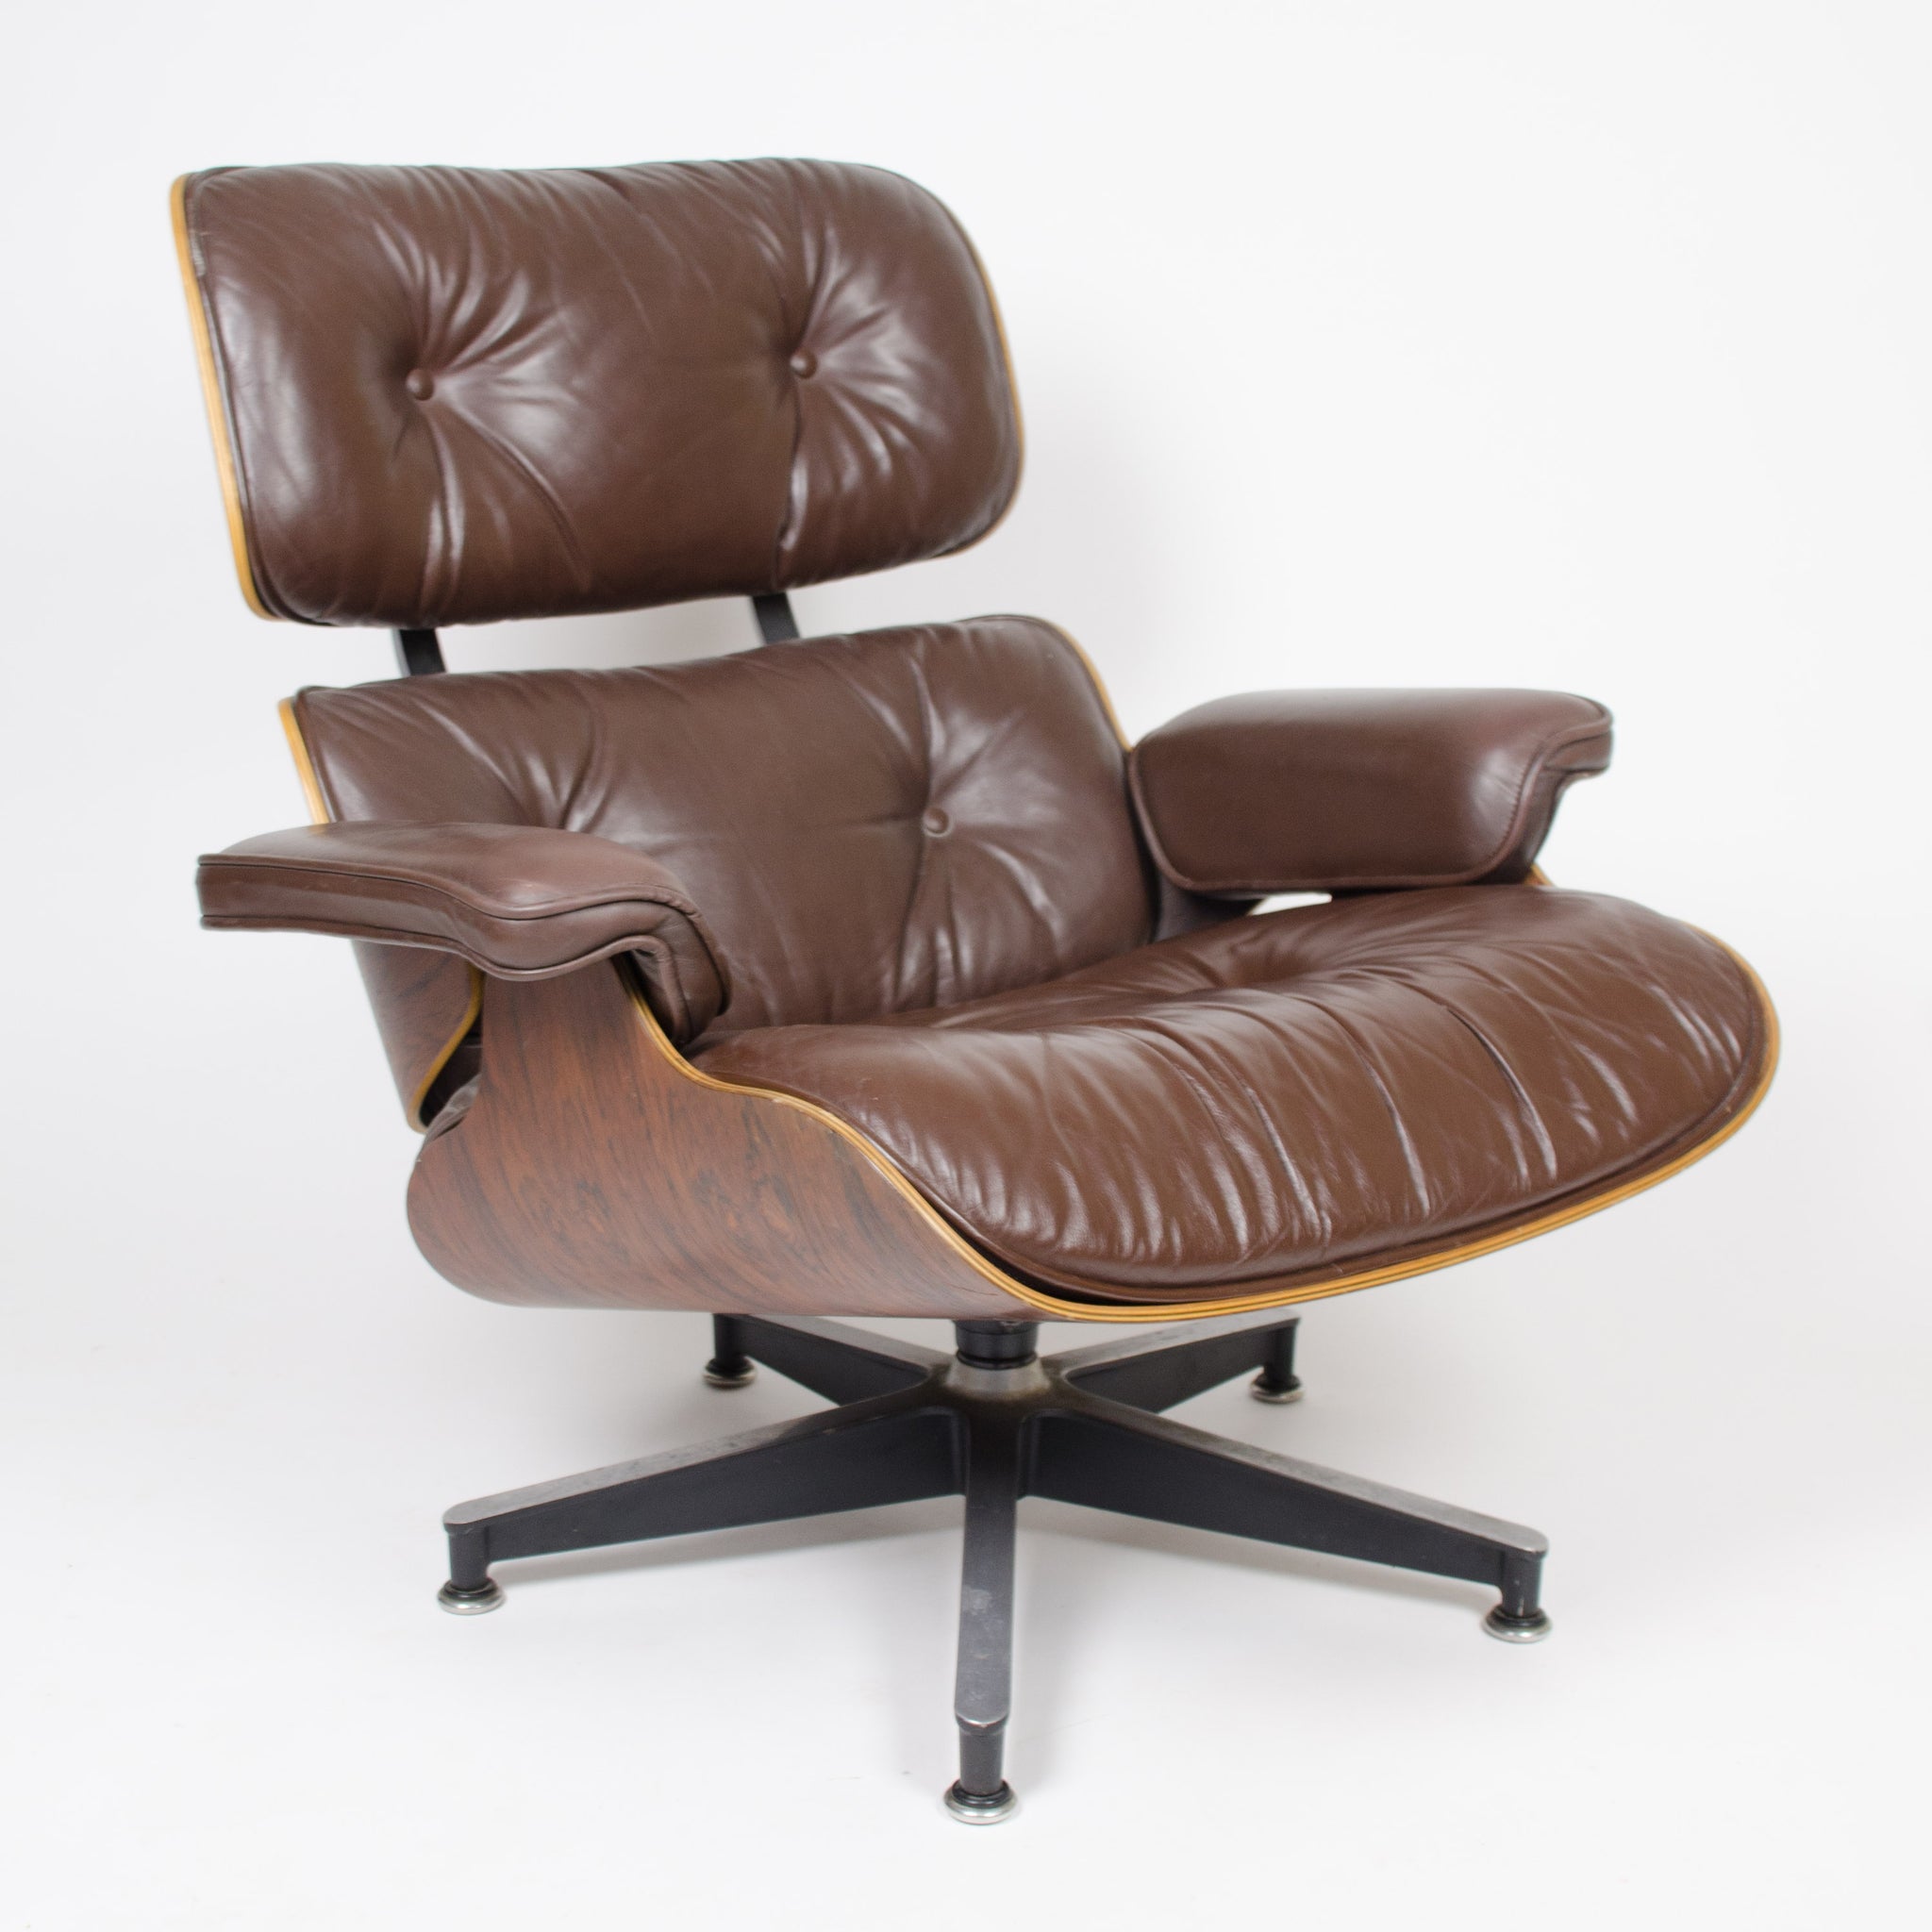 SOLD 1973 Herman Miller Eames Lounge Chair & Ottoman Rosewood 670 671 Brown Leather